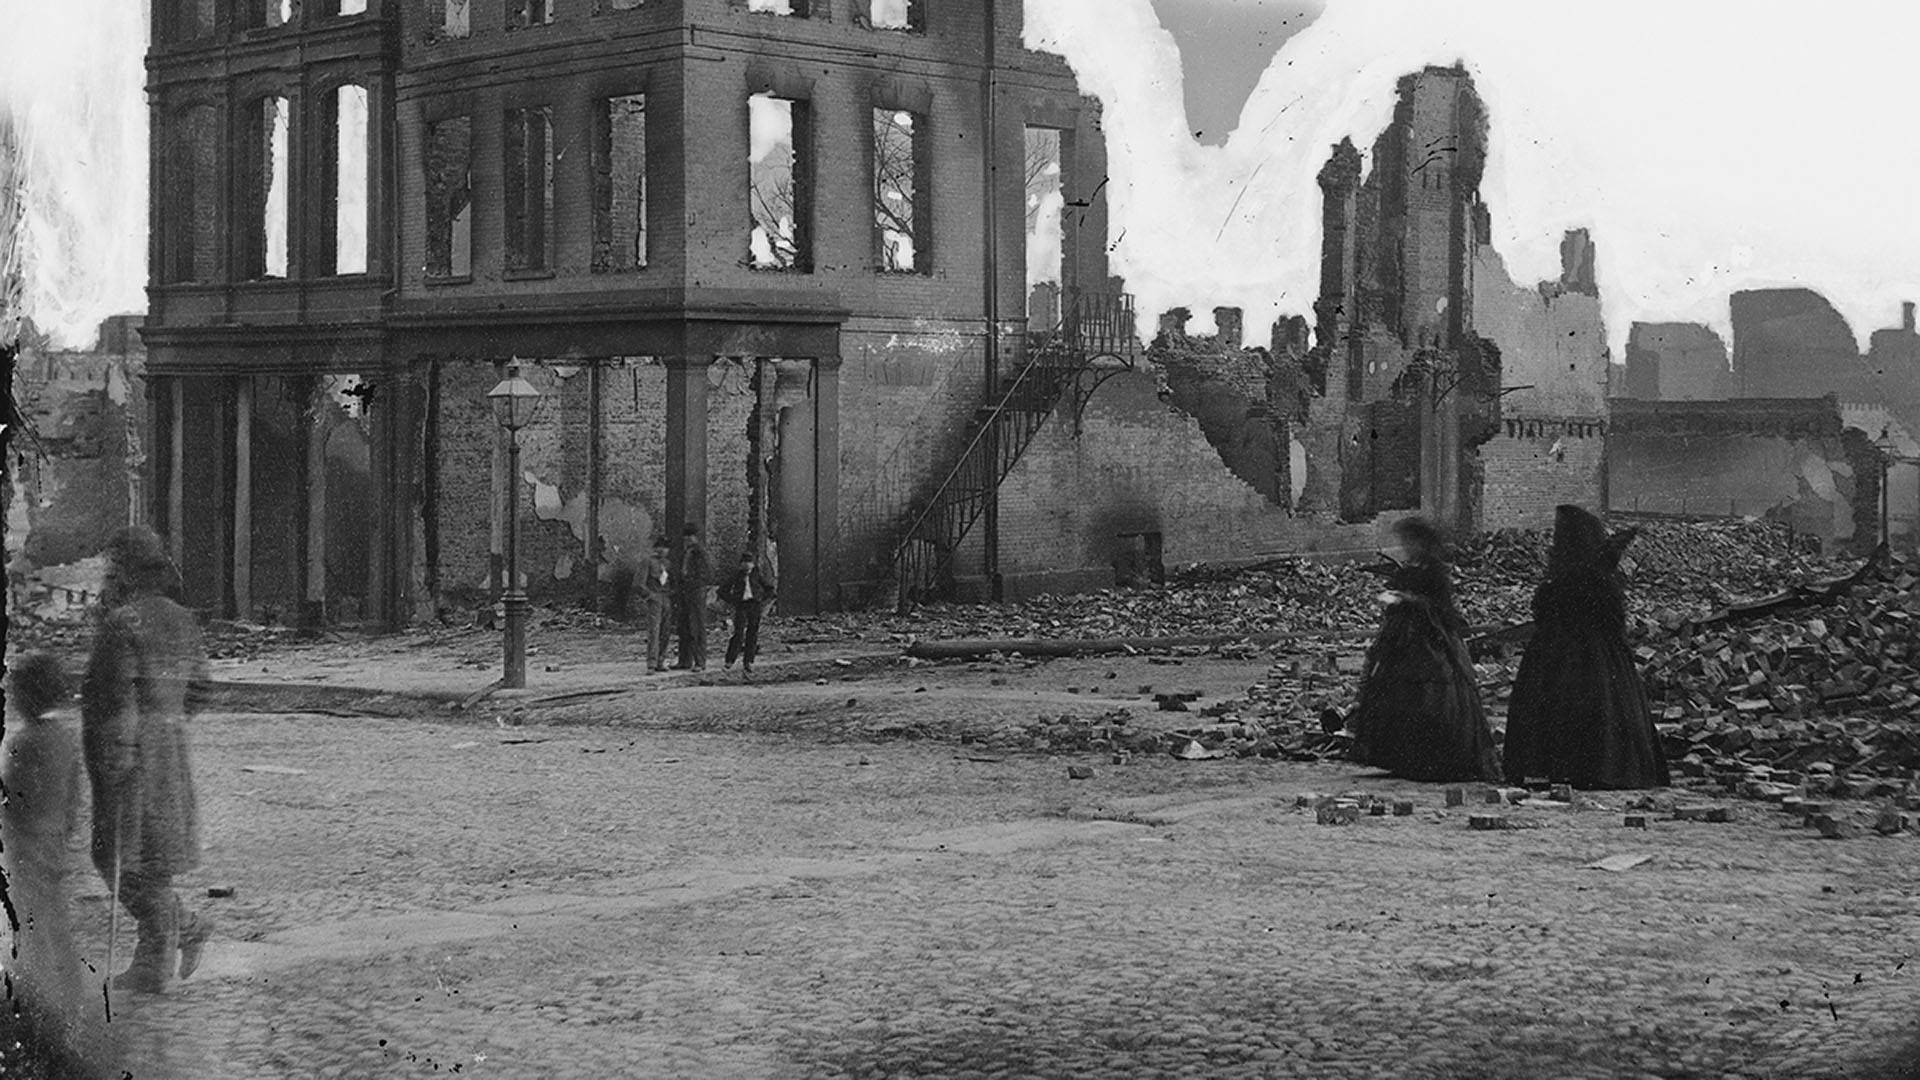 A black-and-white photo showing men and women walking past a ruined building in Richmond, Virginia, circa 1865.